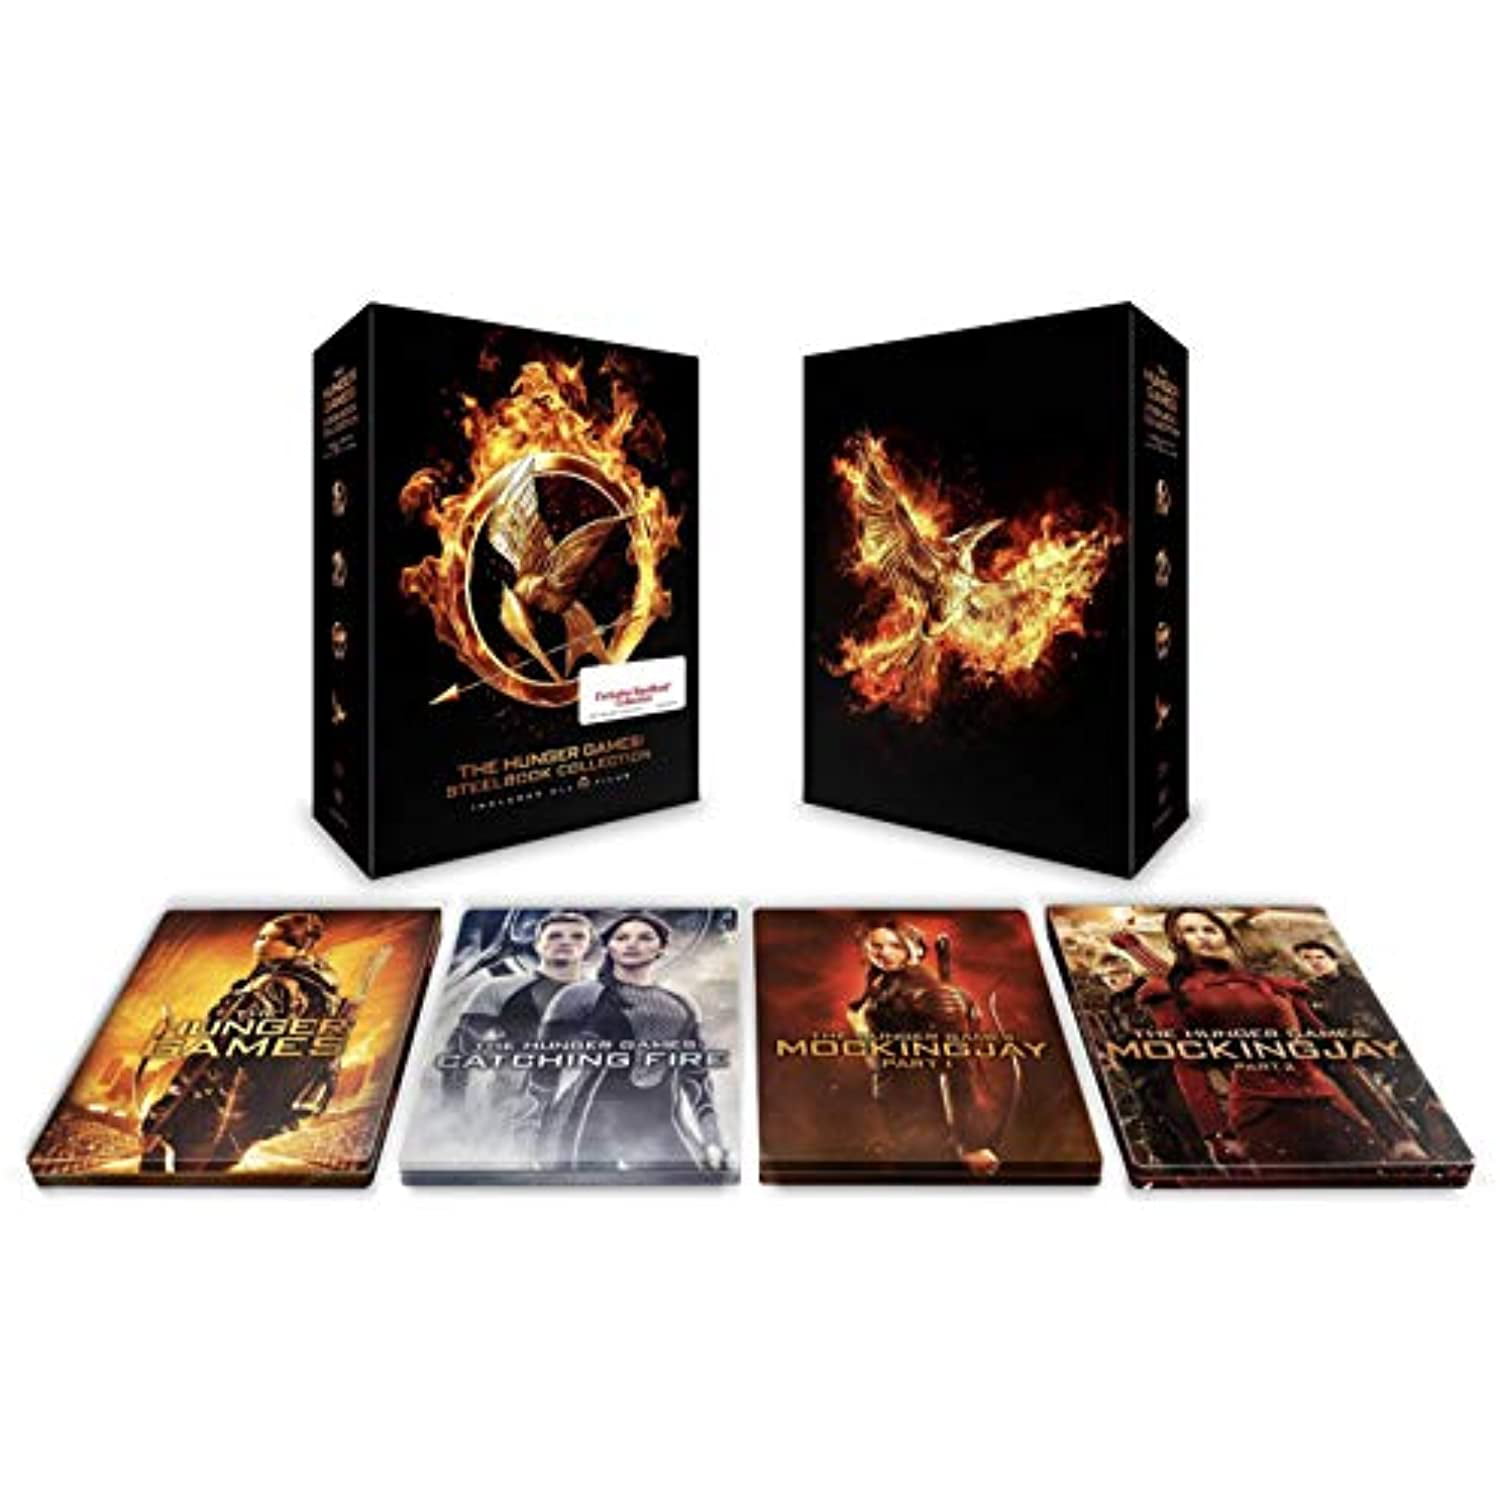 Hunger Games Collection (4K Ultra HD Steelbook)